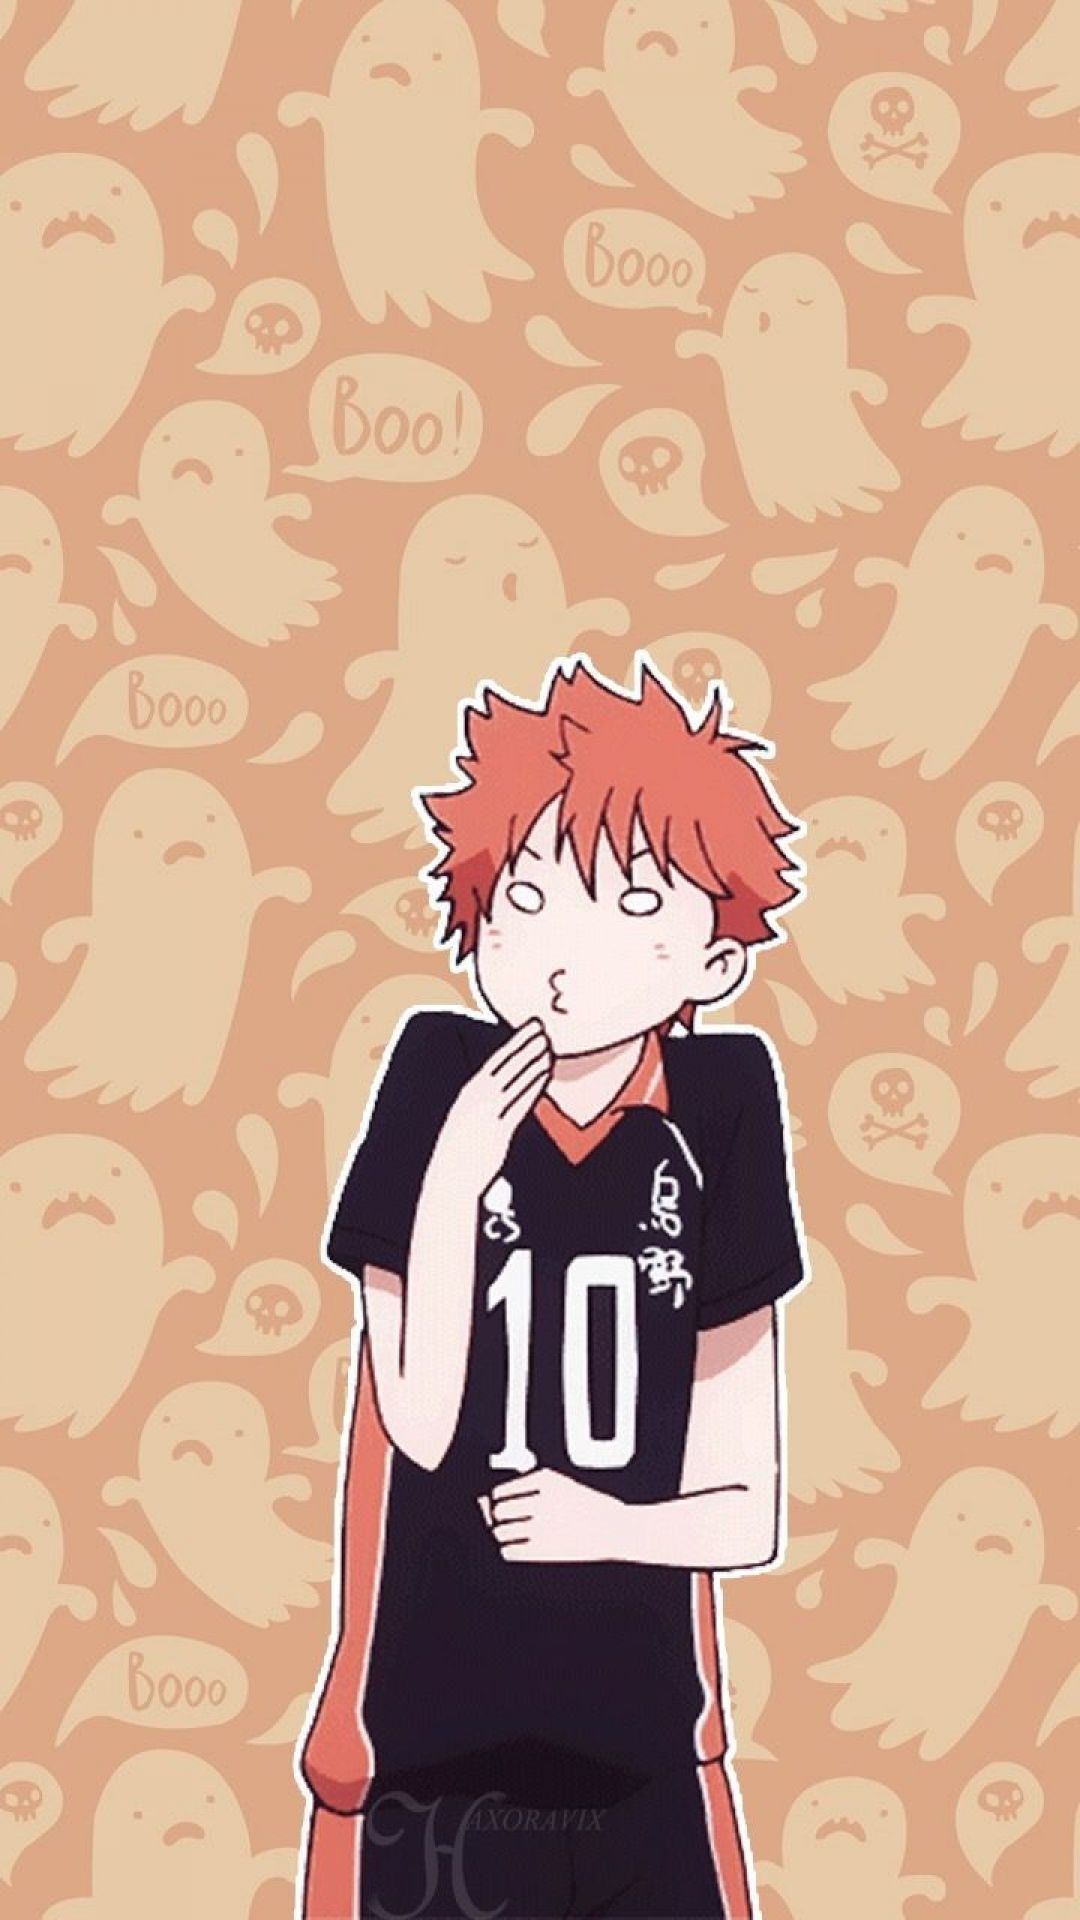 Haikyuu Wallpaper Background Wallpaper Posted By Ethan Cunningham, Looking for the best haikyu wallpaper?